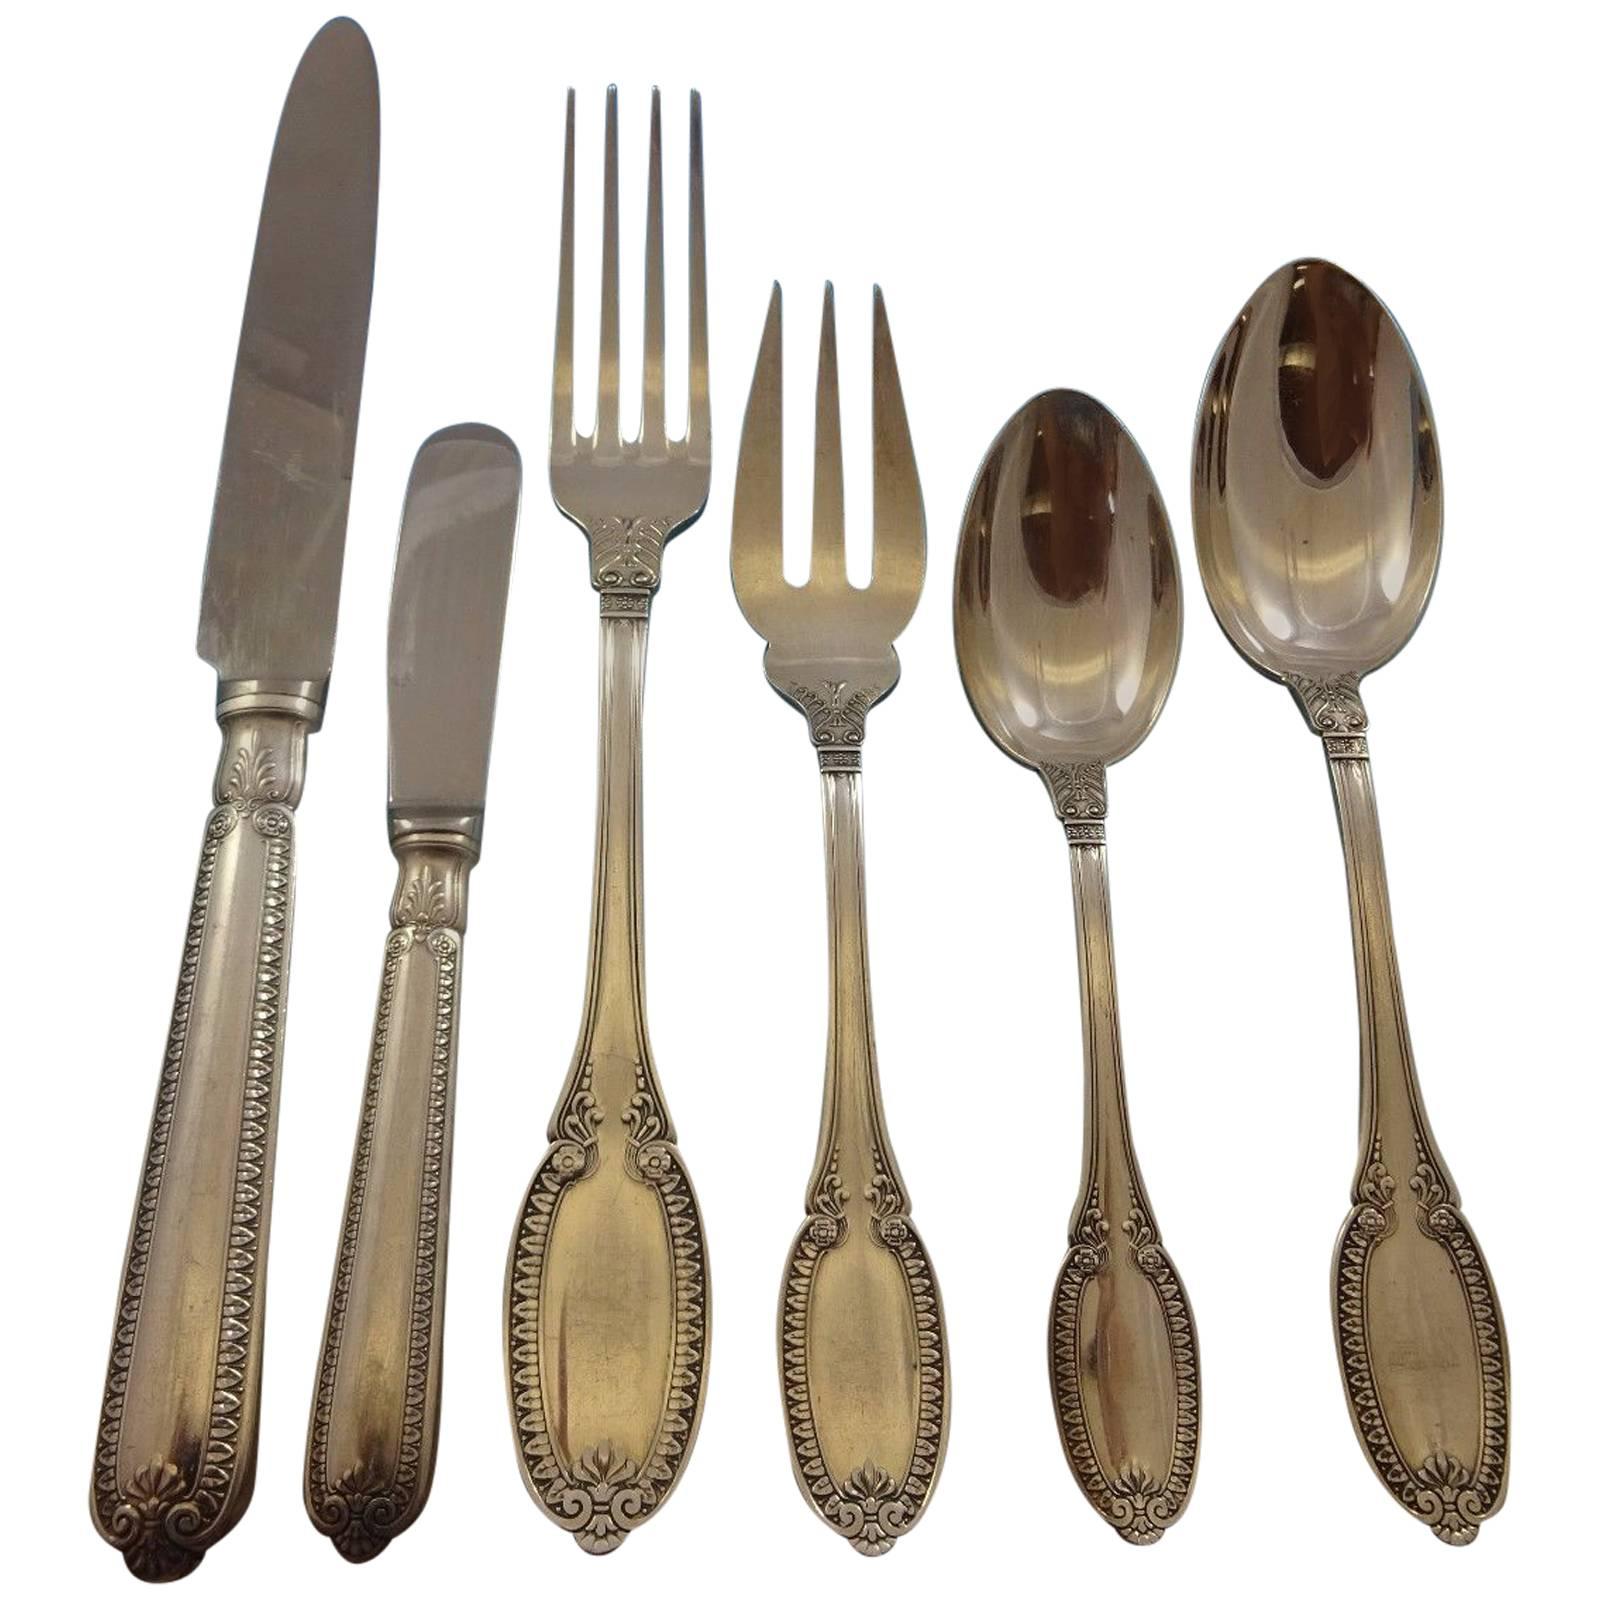 Empire by Buccellati Sterling Silver Flatware Set, Dinner 8 Service, 48 Pieces